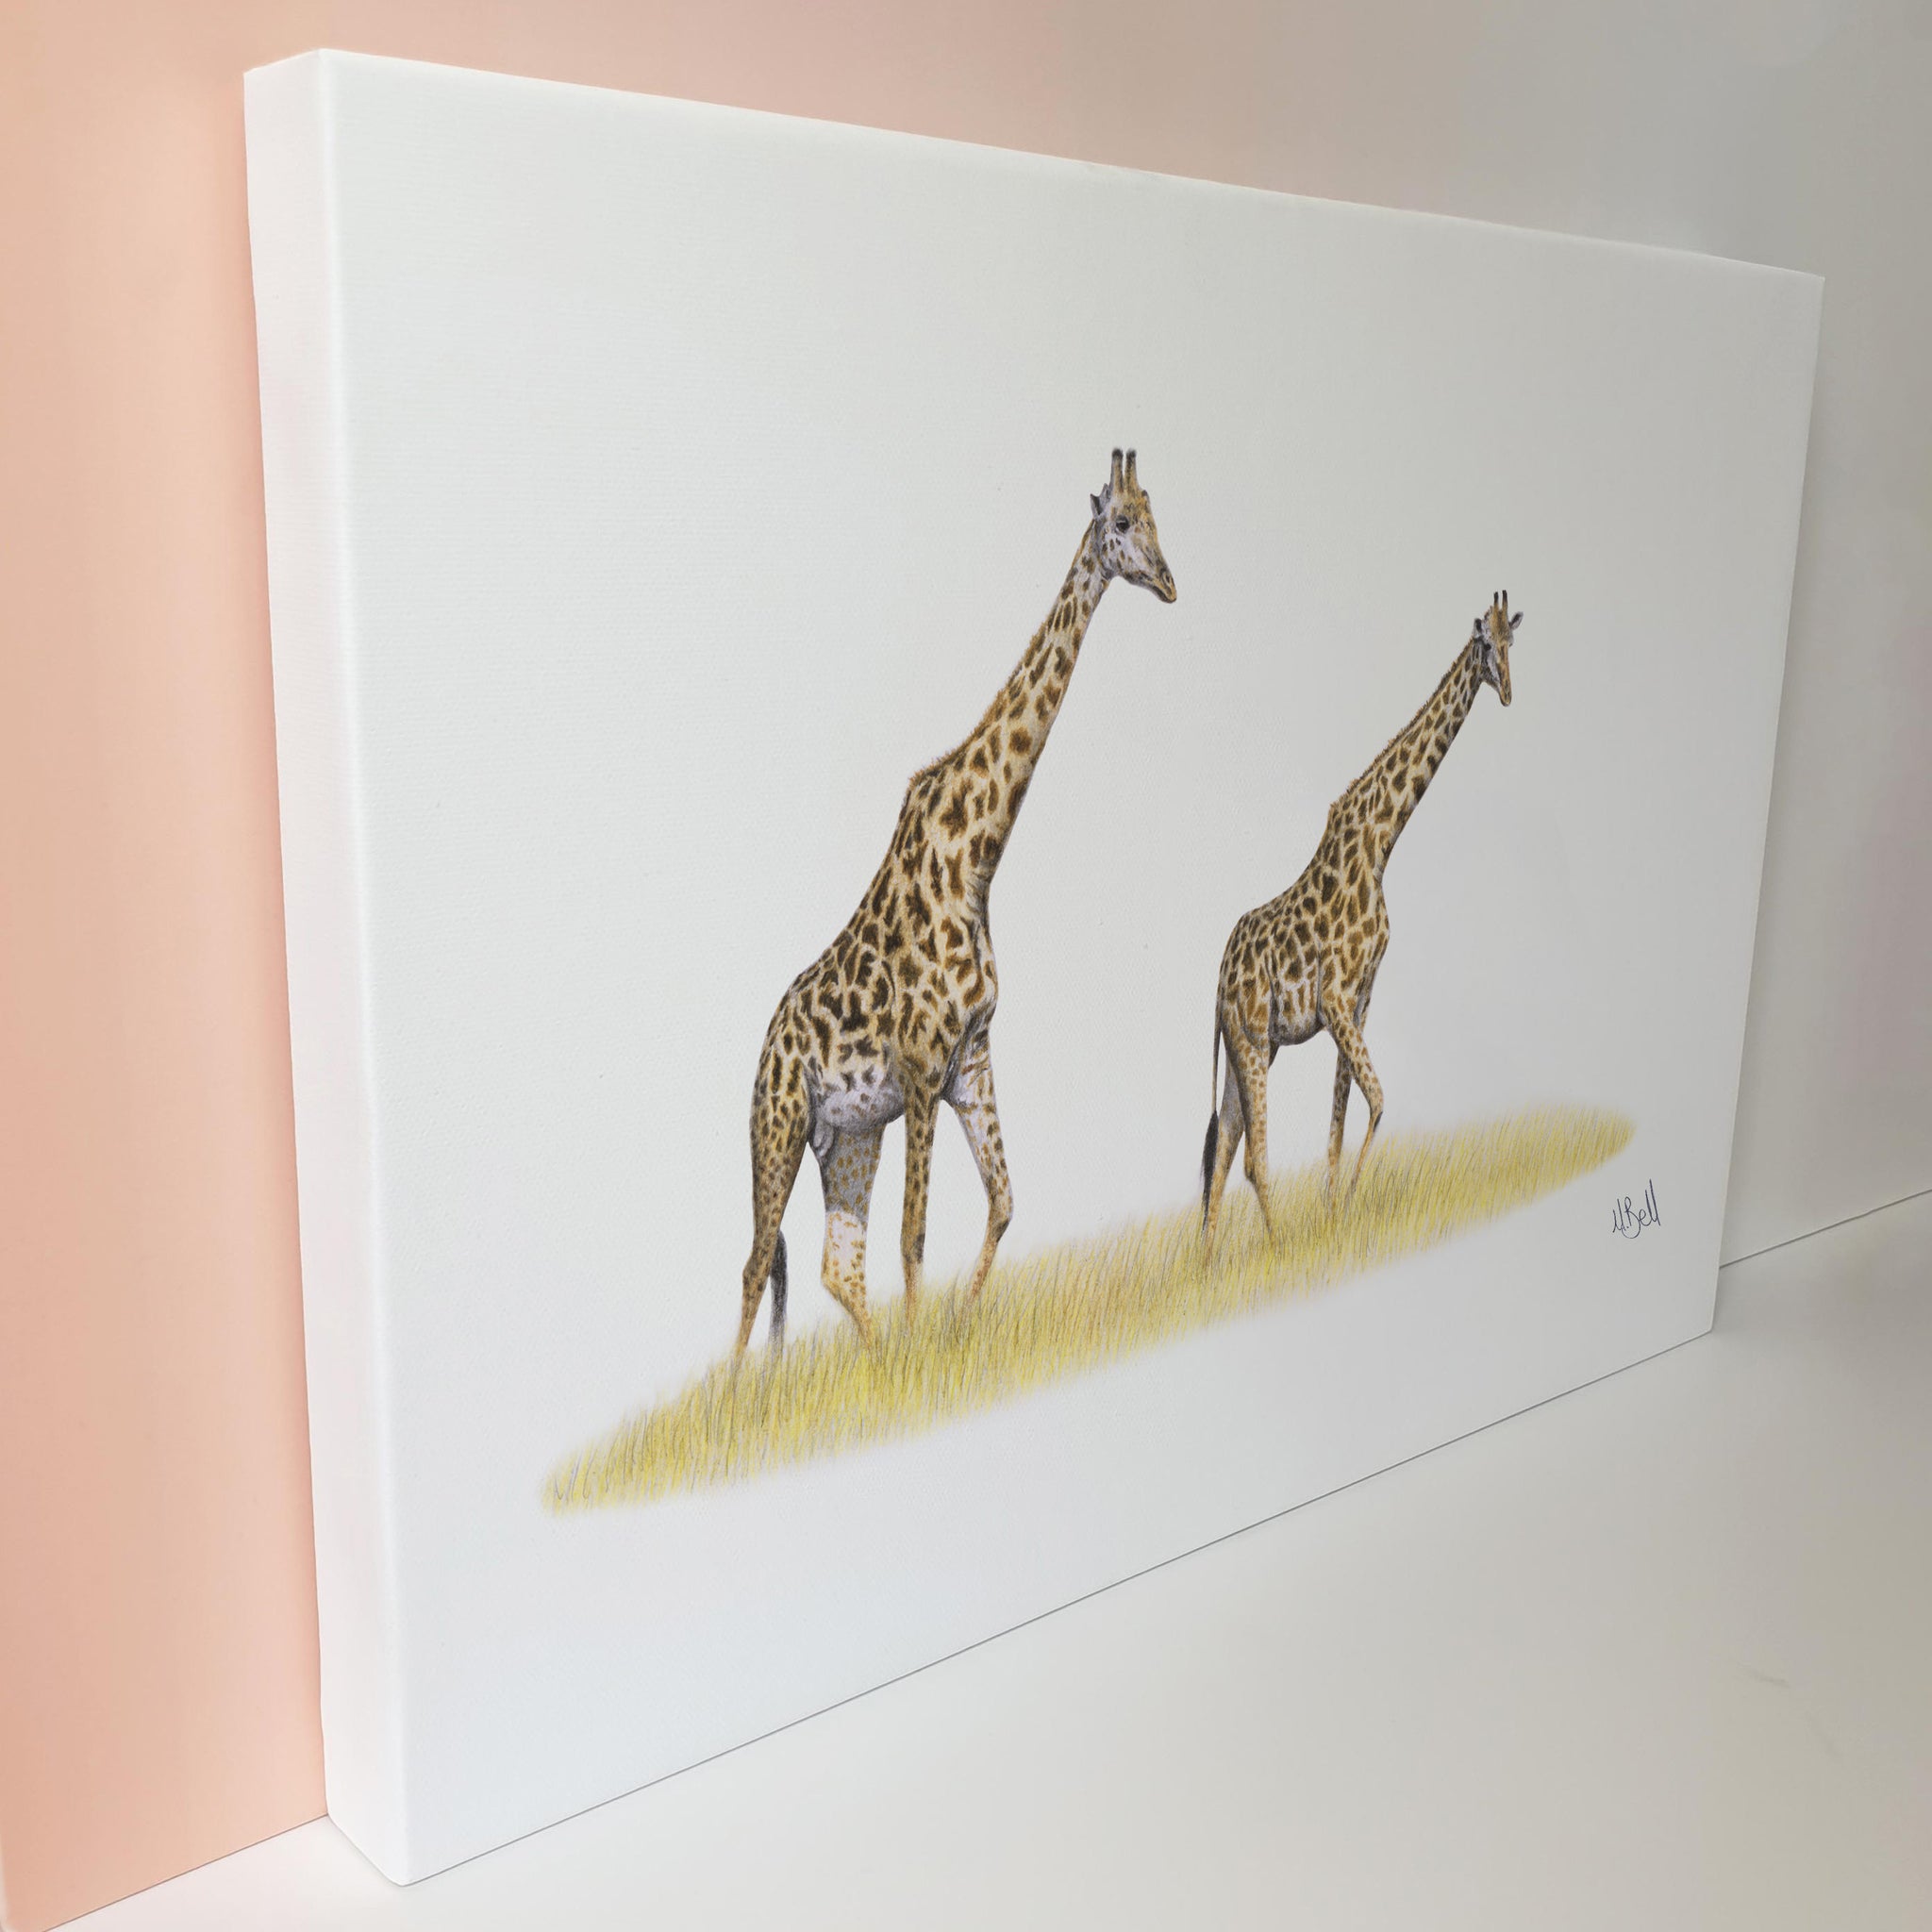 A pair of giraffes walking in the Serengeti artwork print on stretched canvas